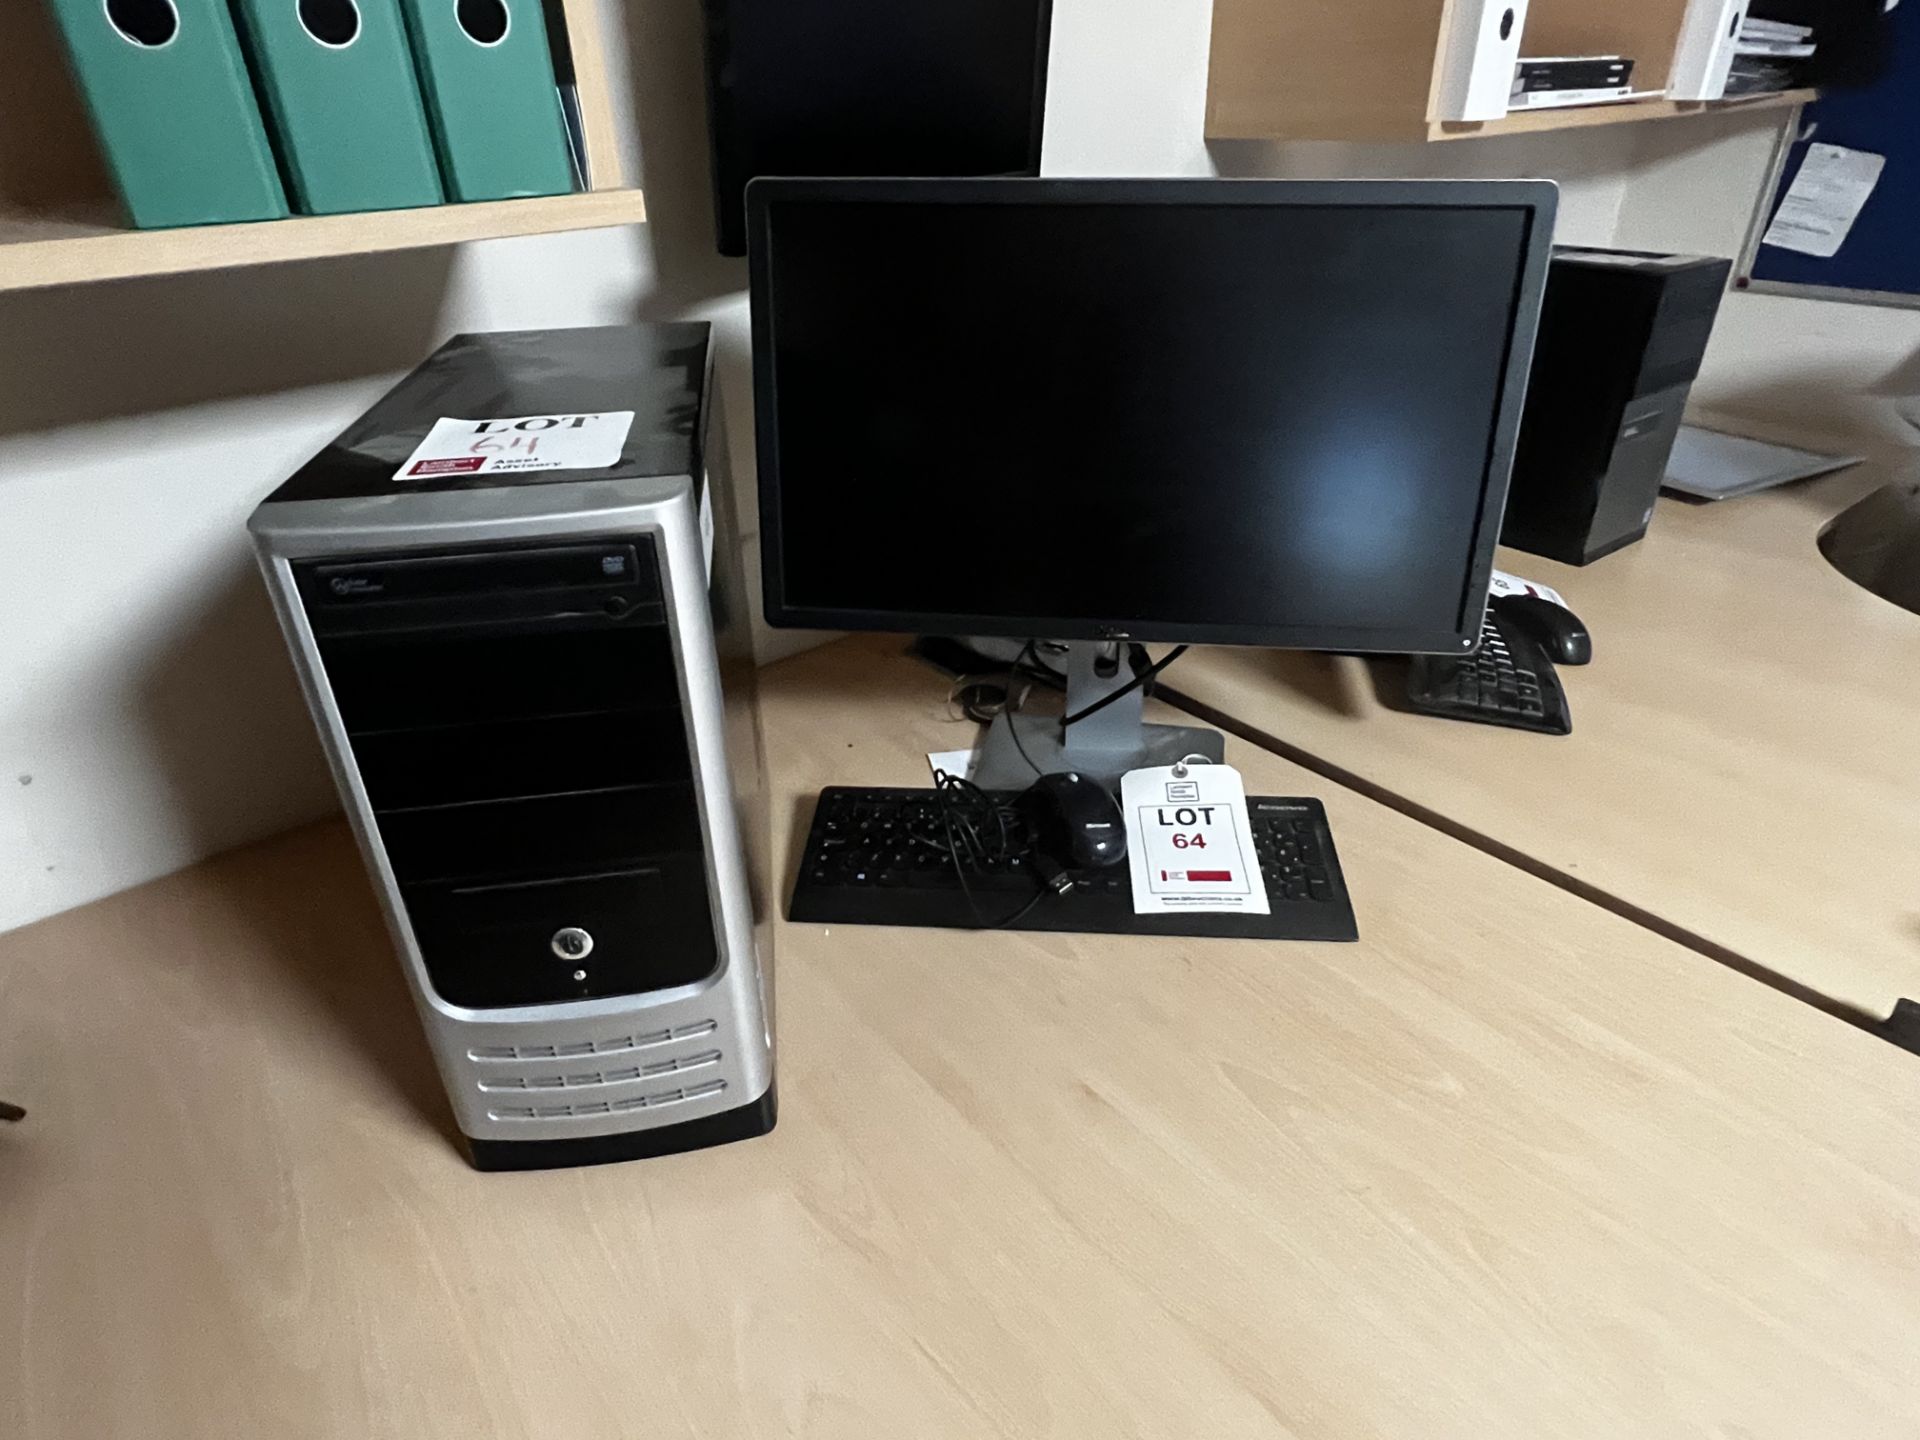 Unbranded PC & 1 Dell monitor, with keyboard & mouse